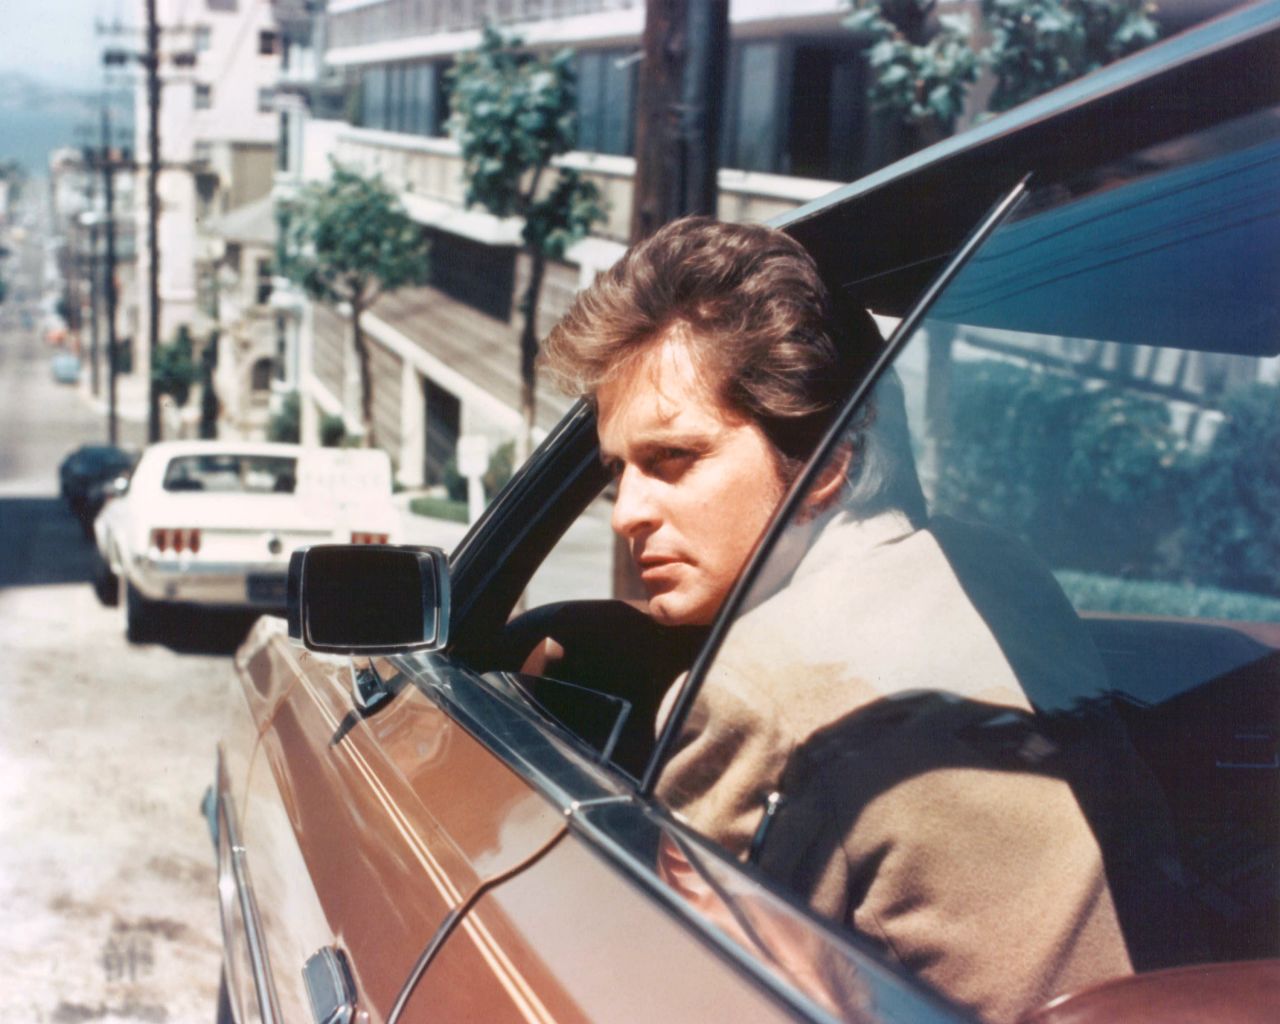 Douglas peers out of the window of a car as Inspector Steve Keller on "Streets of San Francisco."